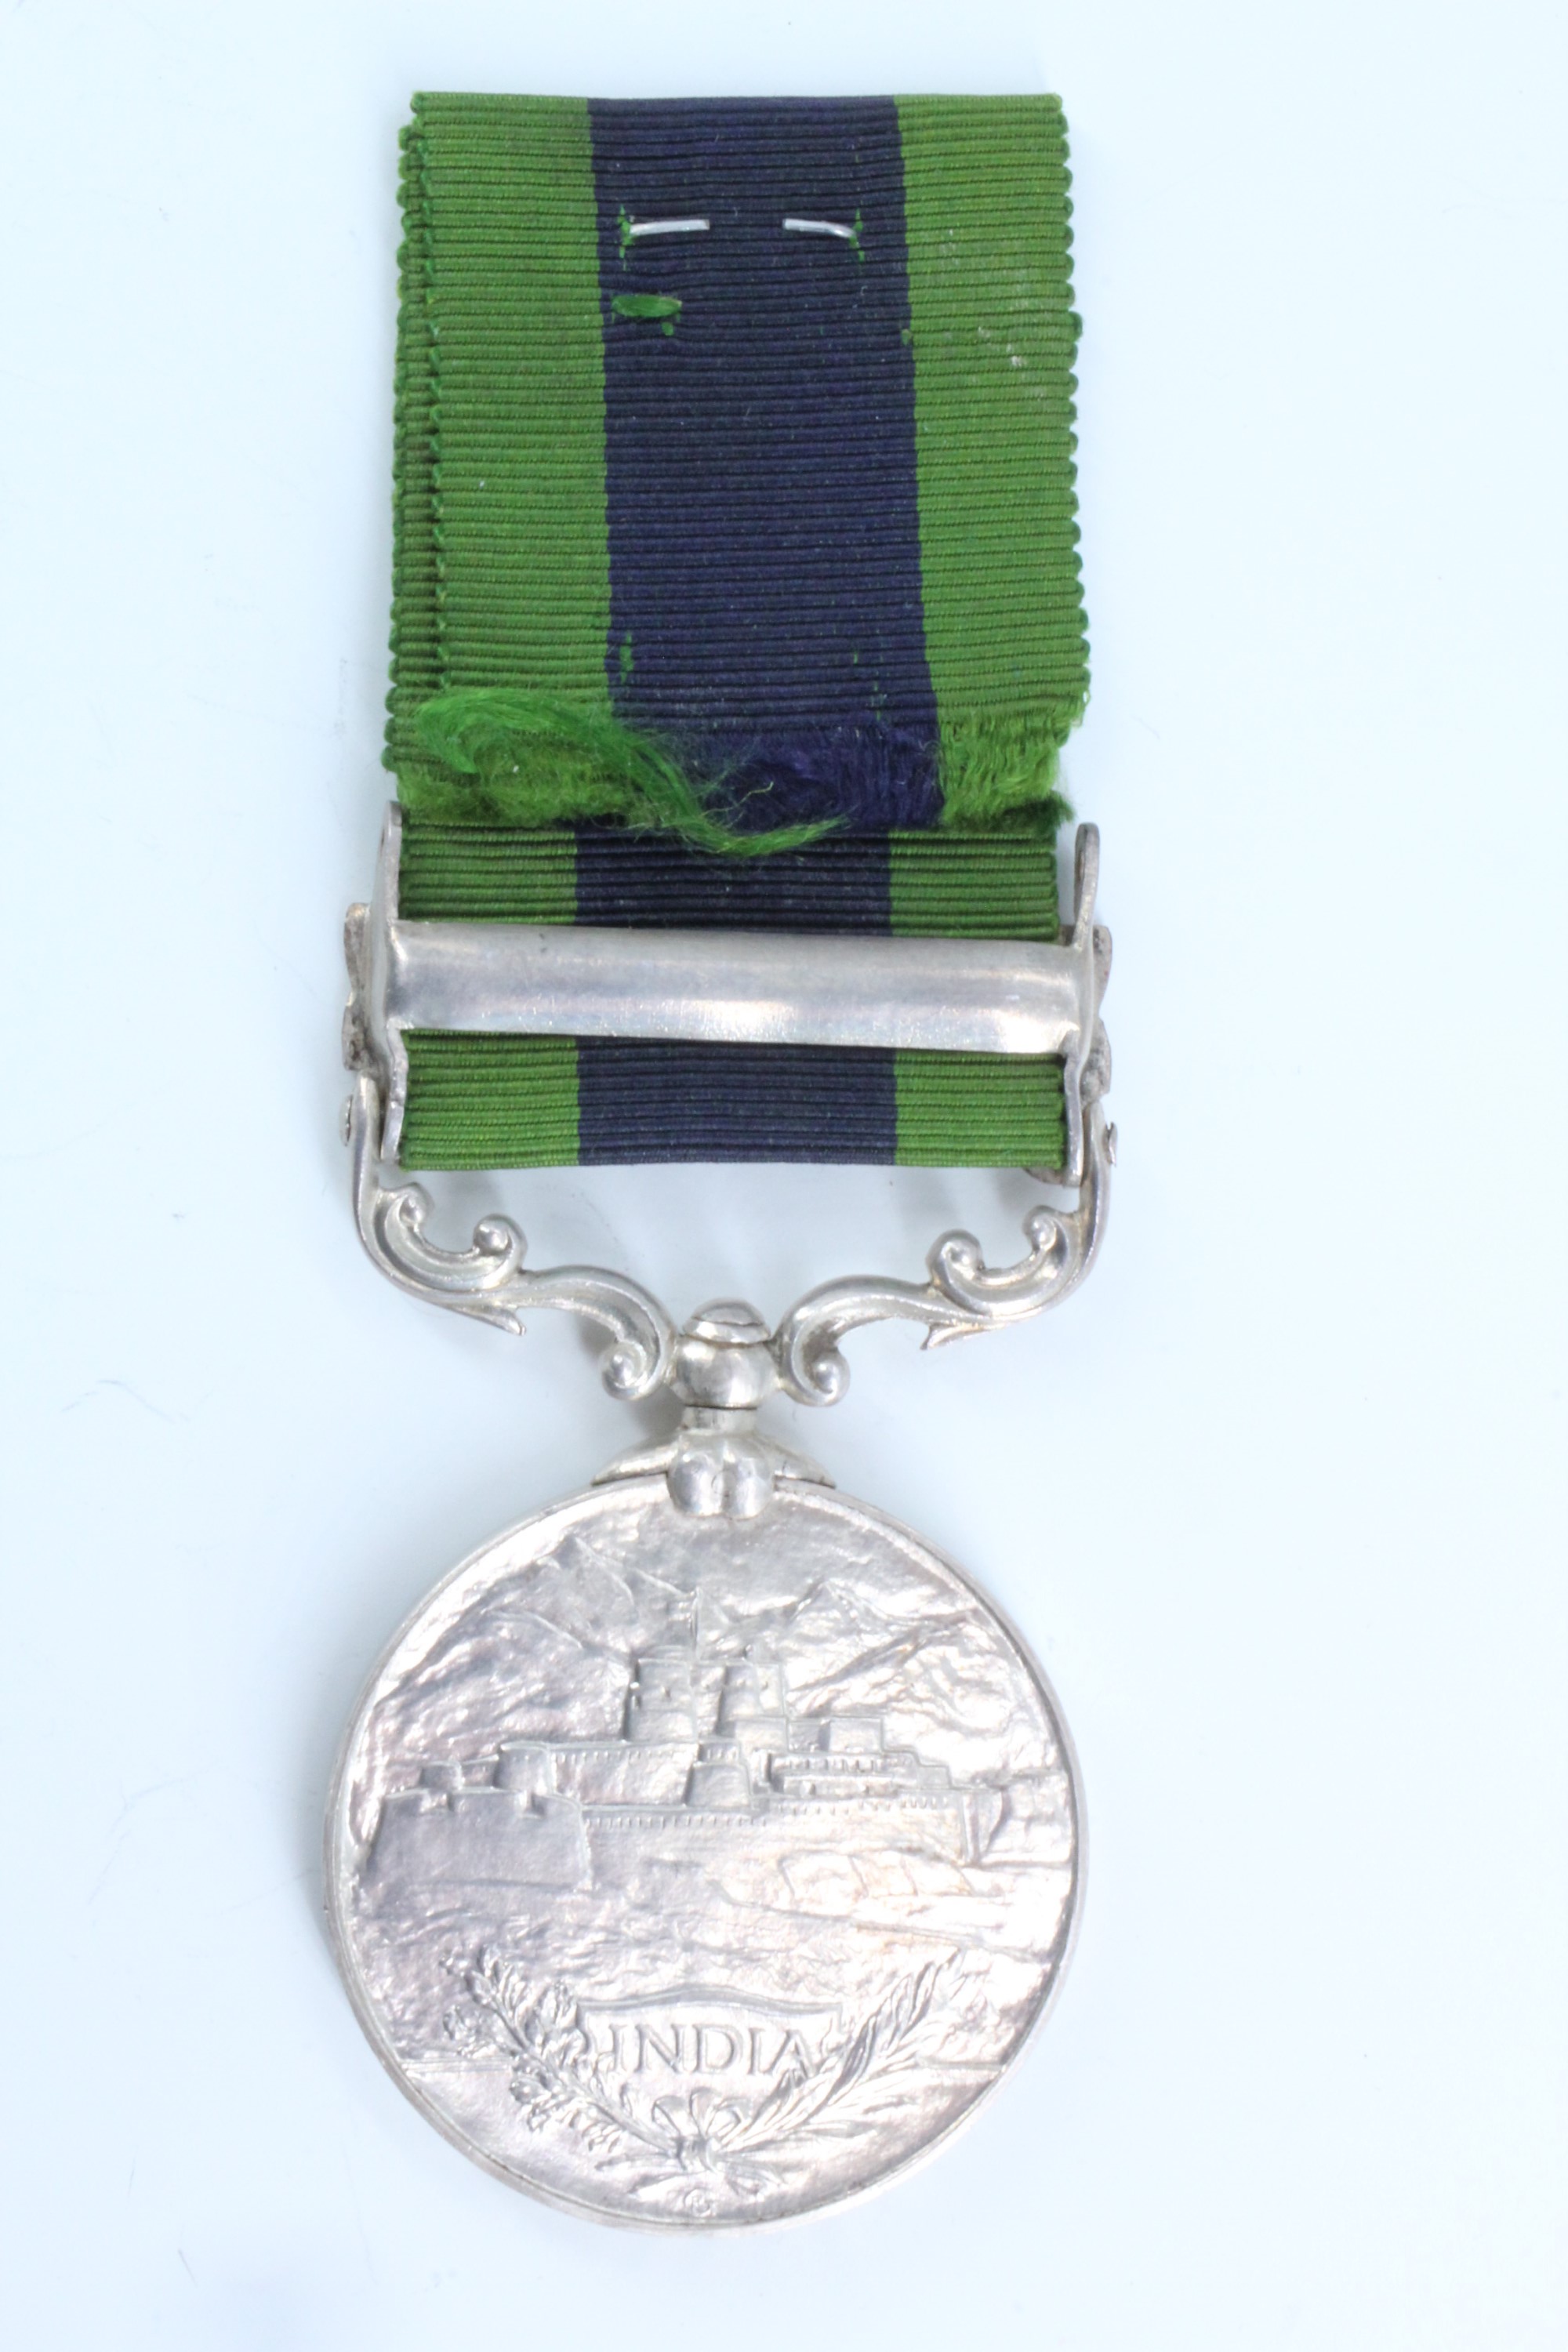 An India General Service Medal with North West Frontier 1930-31 clasp to 507067 AC1 J Taylor, RAF - Image 2 of 4